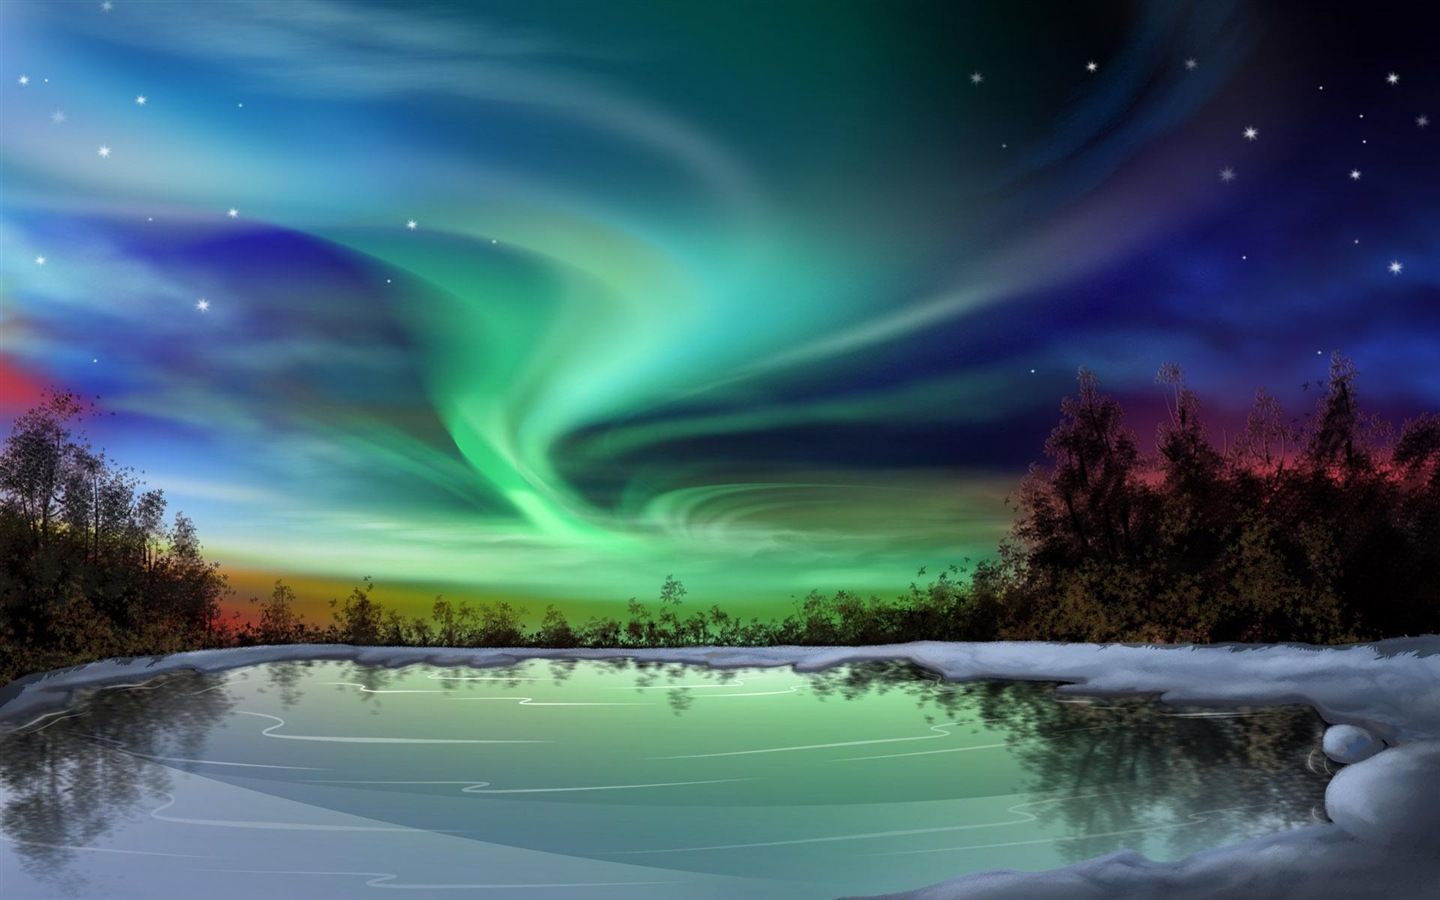 Natural wonders of the Northern Lights HD Wallpaper (2) #25 - 1440x900